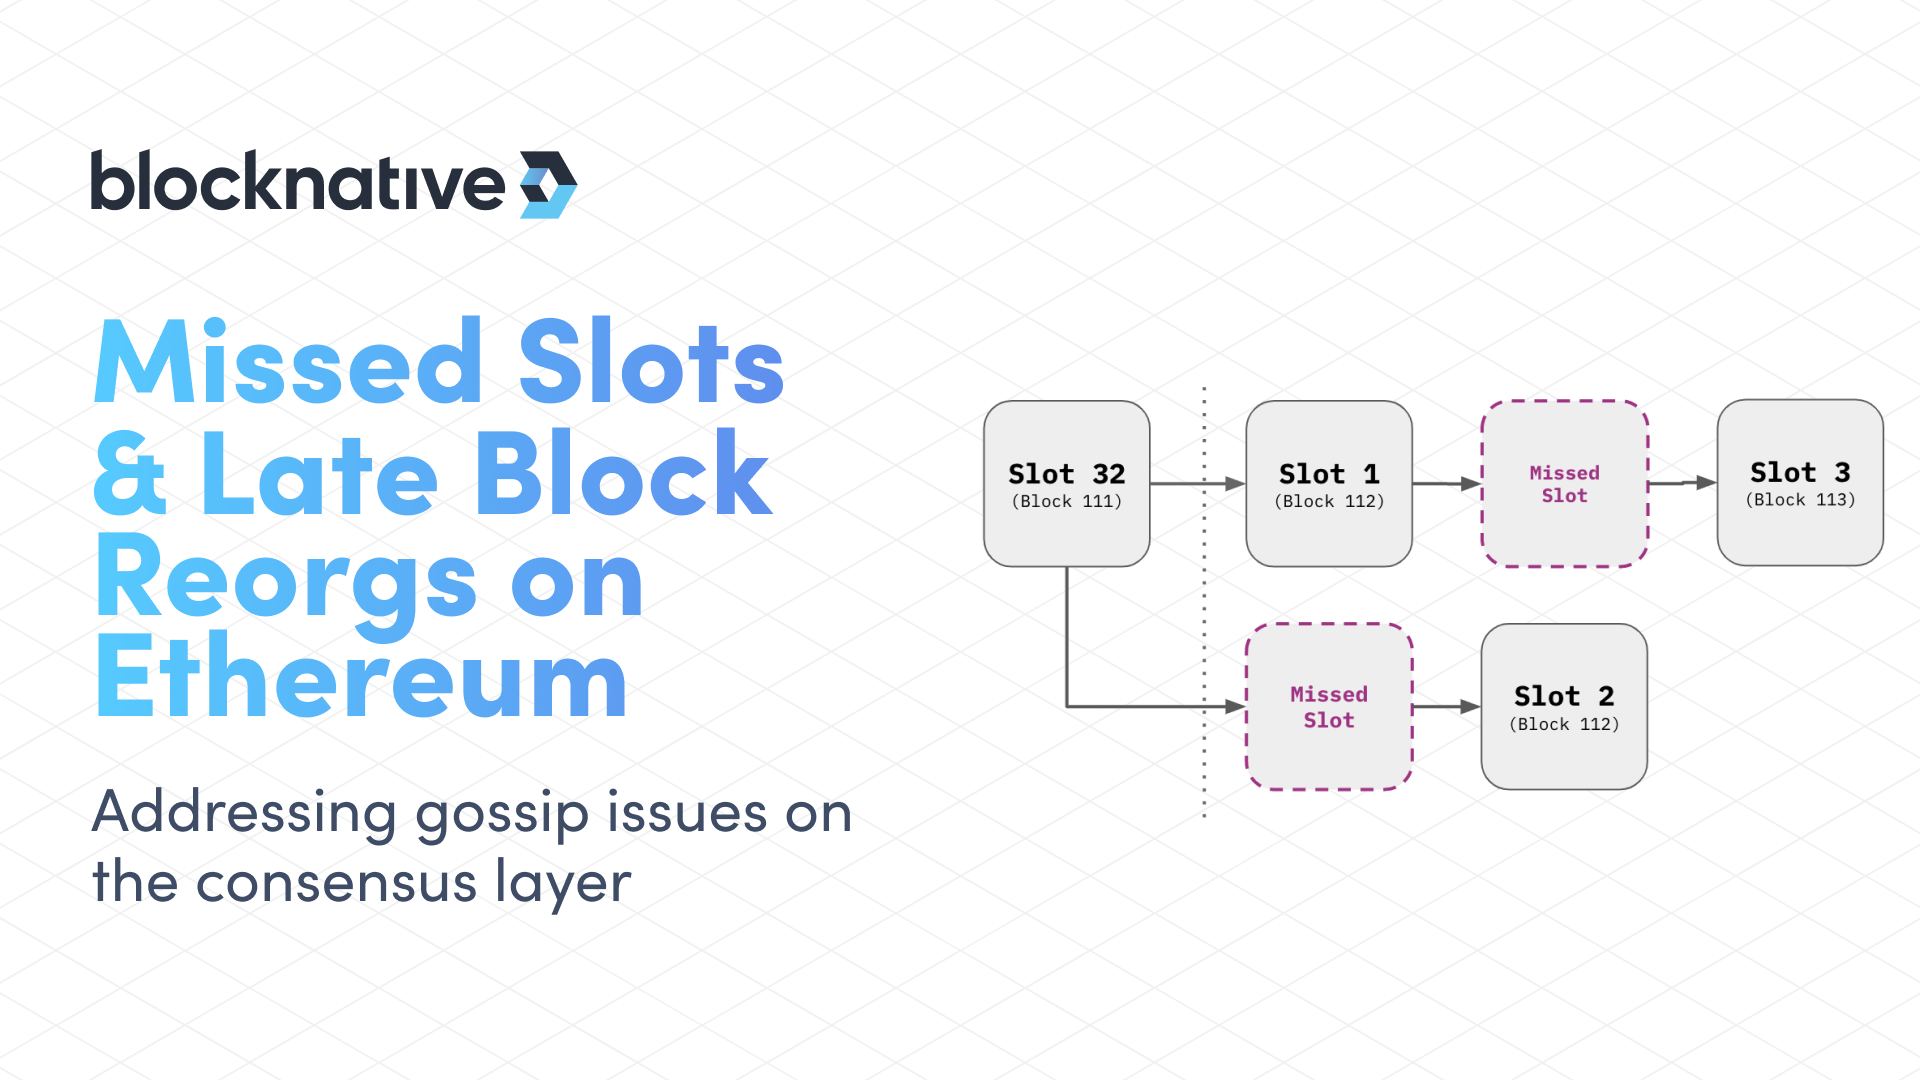 missed-slots-caused-by-gossip-issues-on-consensus-layer:-addressing-late-block-reorgs-on-ethereum